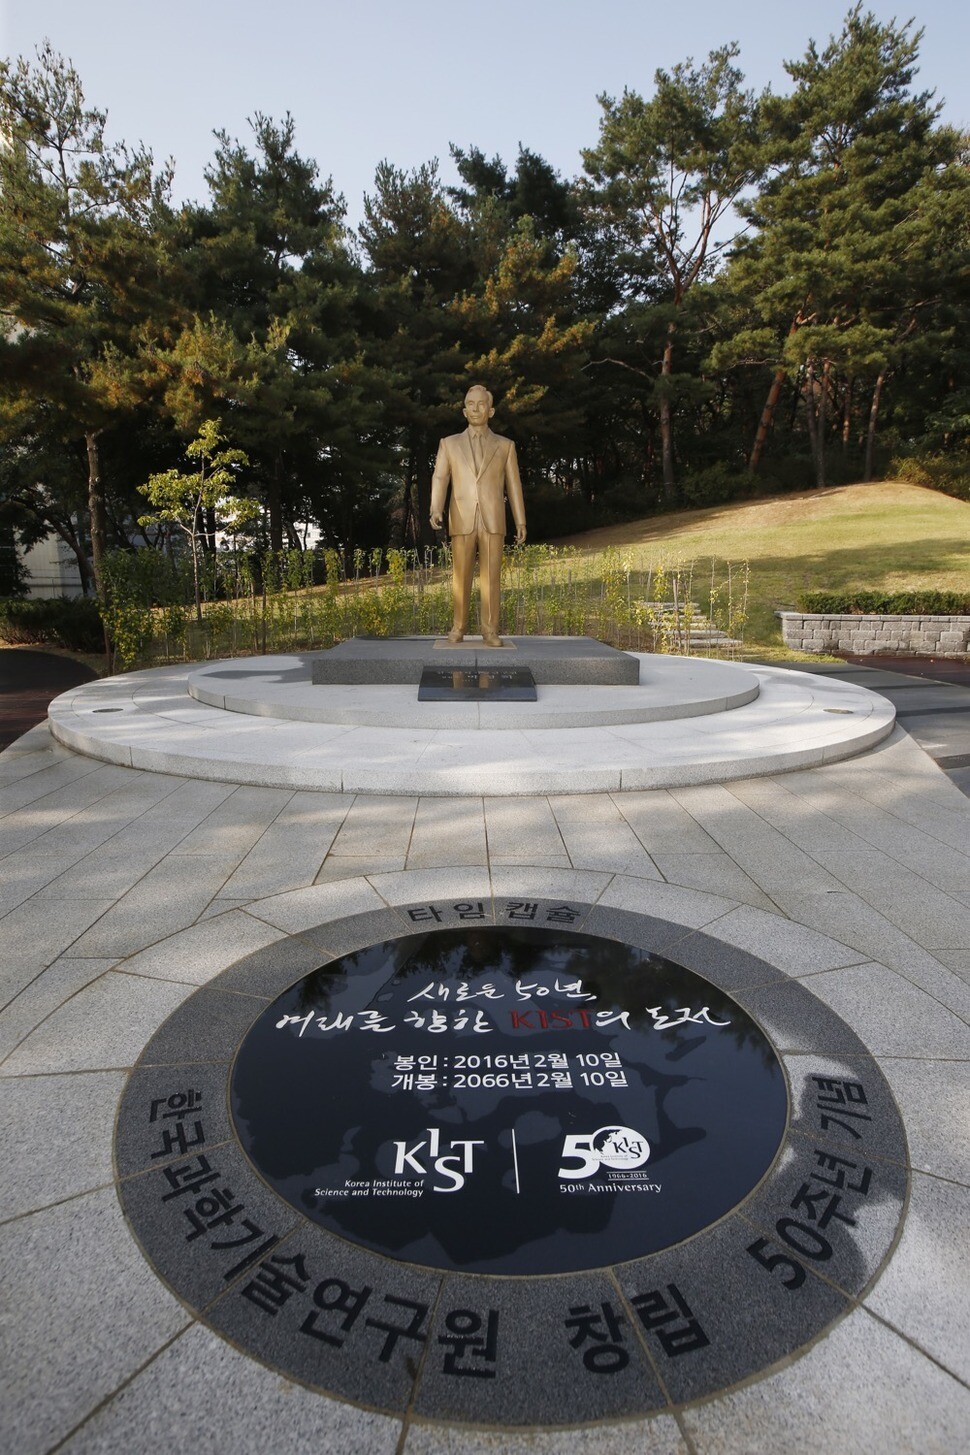  North Gyeongsang Province depicts Park Chung-hee as a young boy